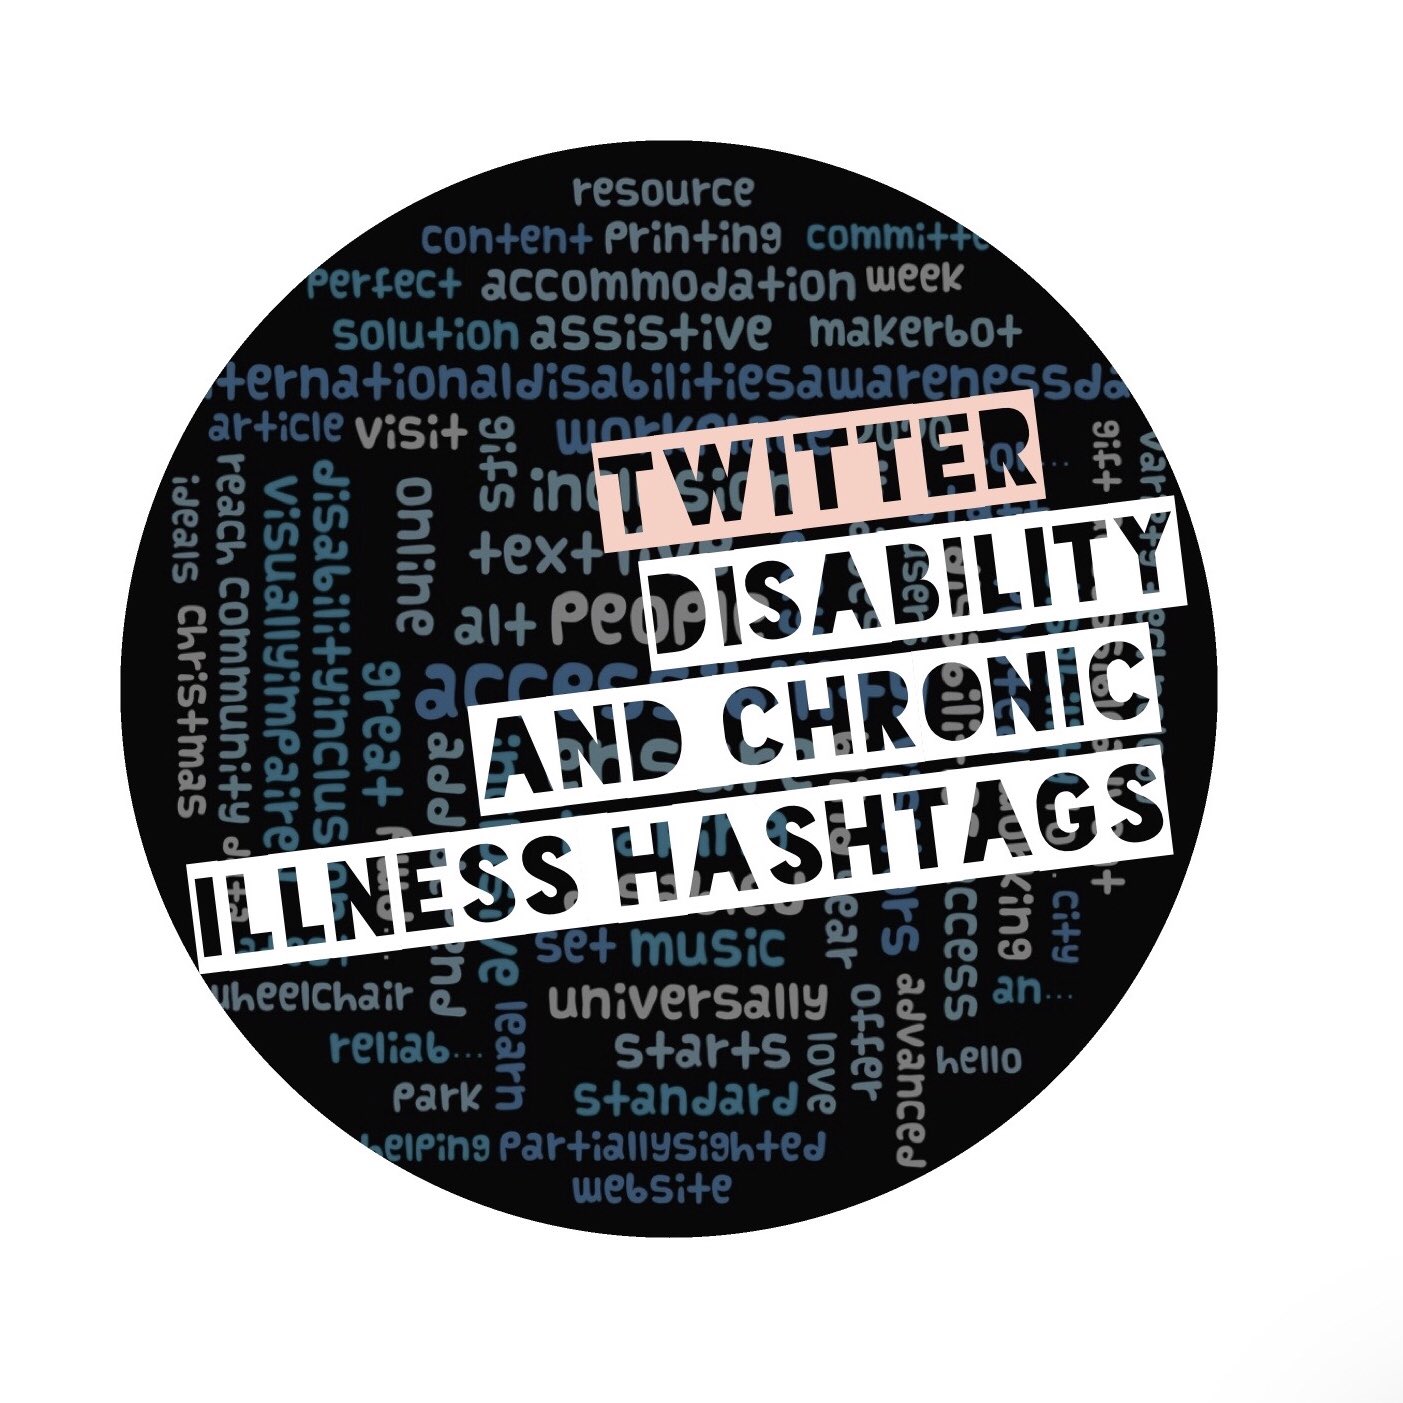 Word cloud of disability hastags with the Title "Twitter Disability and Chronic Illness hashtags"